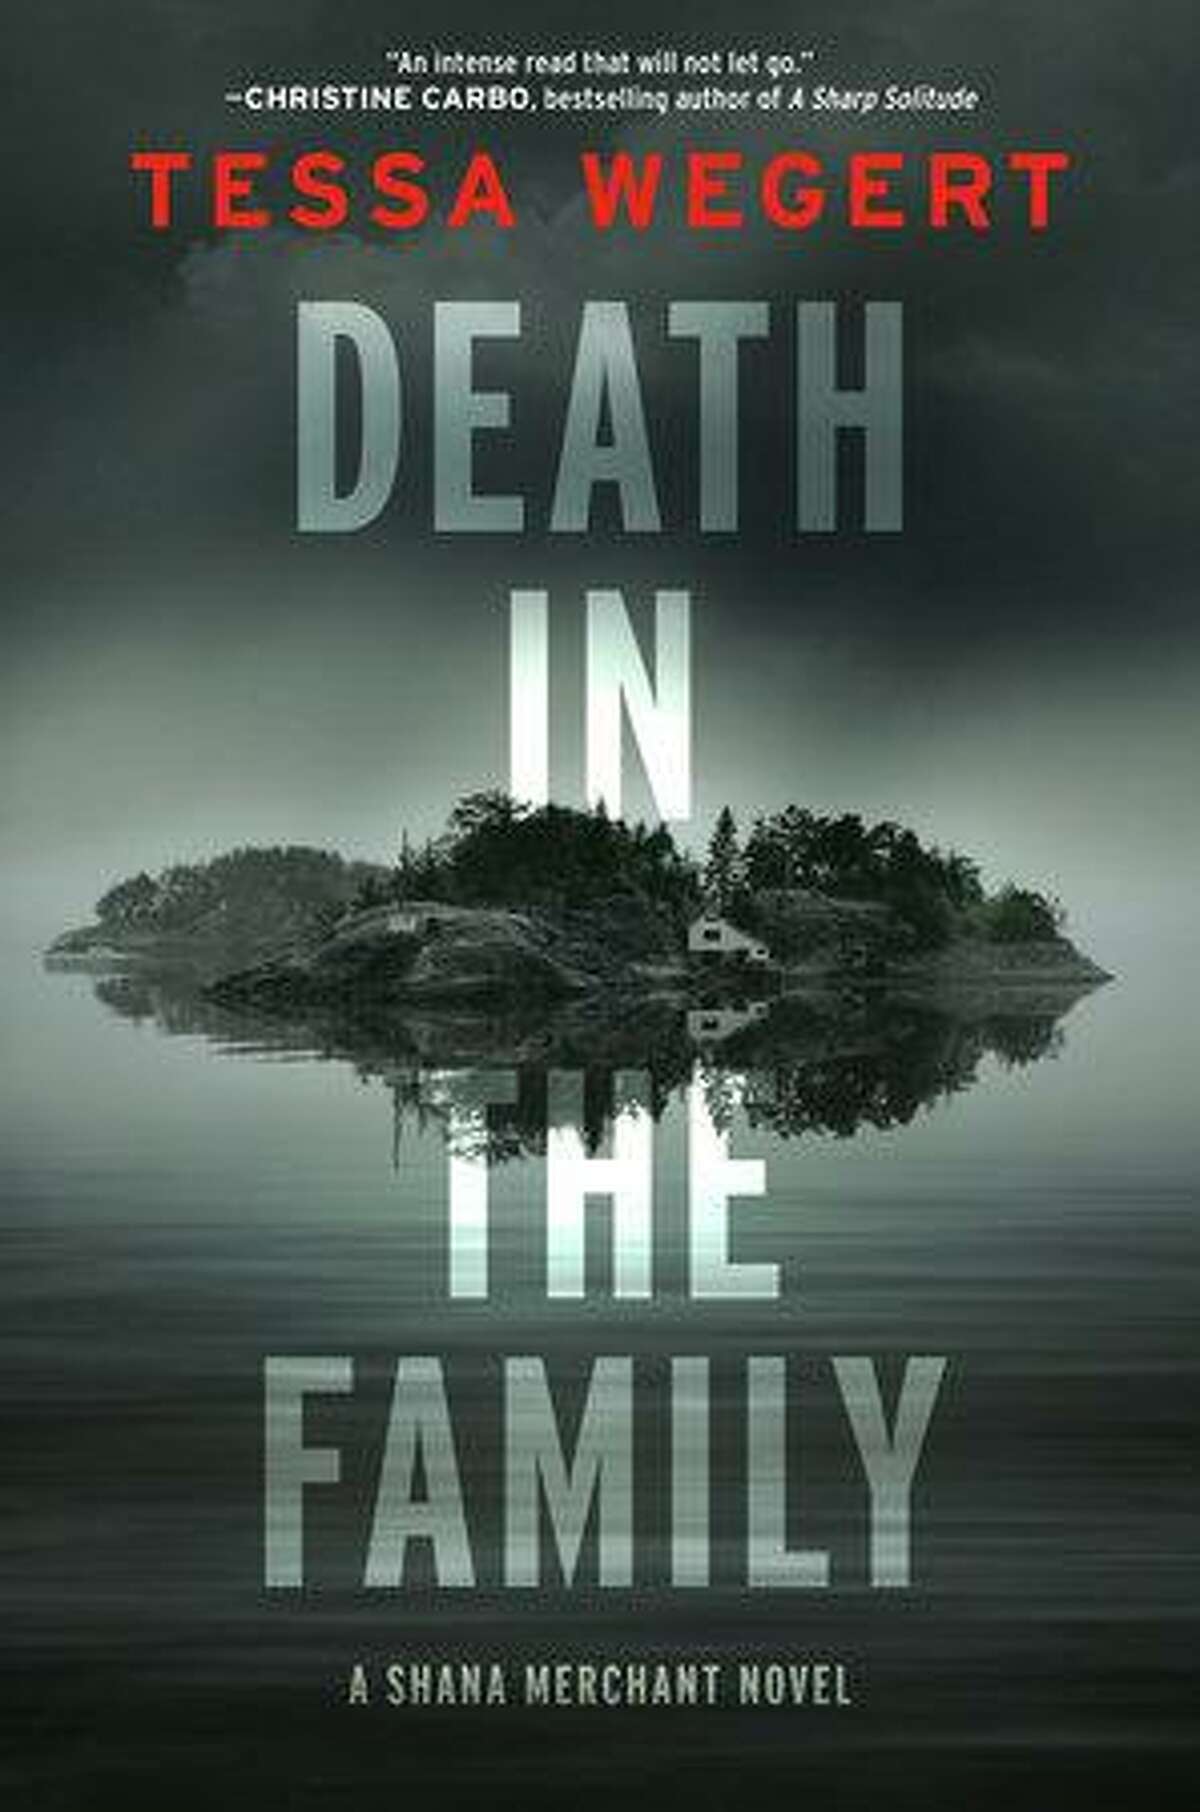 Darien resident Tessa Wegert will have a reading and author Q&A to celebrate the publication of her debut mystery novel, “Death in the Family” on Feb. 18 at 7 p.m. at Barrett Bookstore, 6 Corbin Dr., Darien. For more information, visit barrettbookstore.com/event/tessa-wegert-death-family